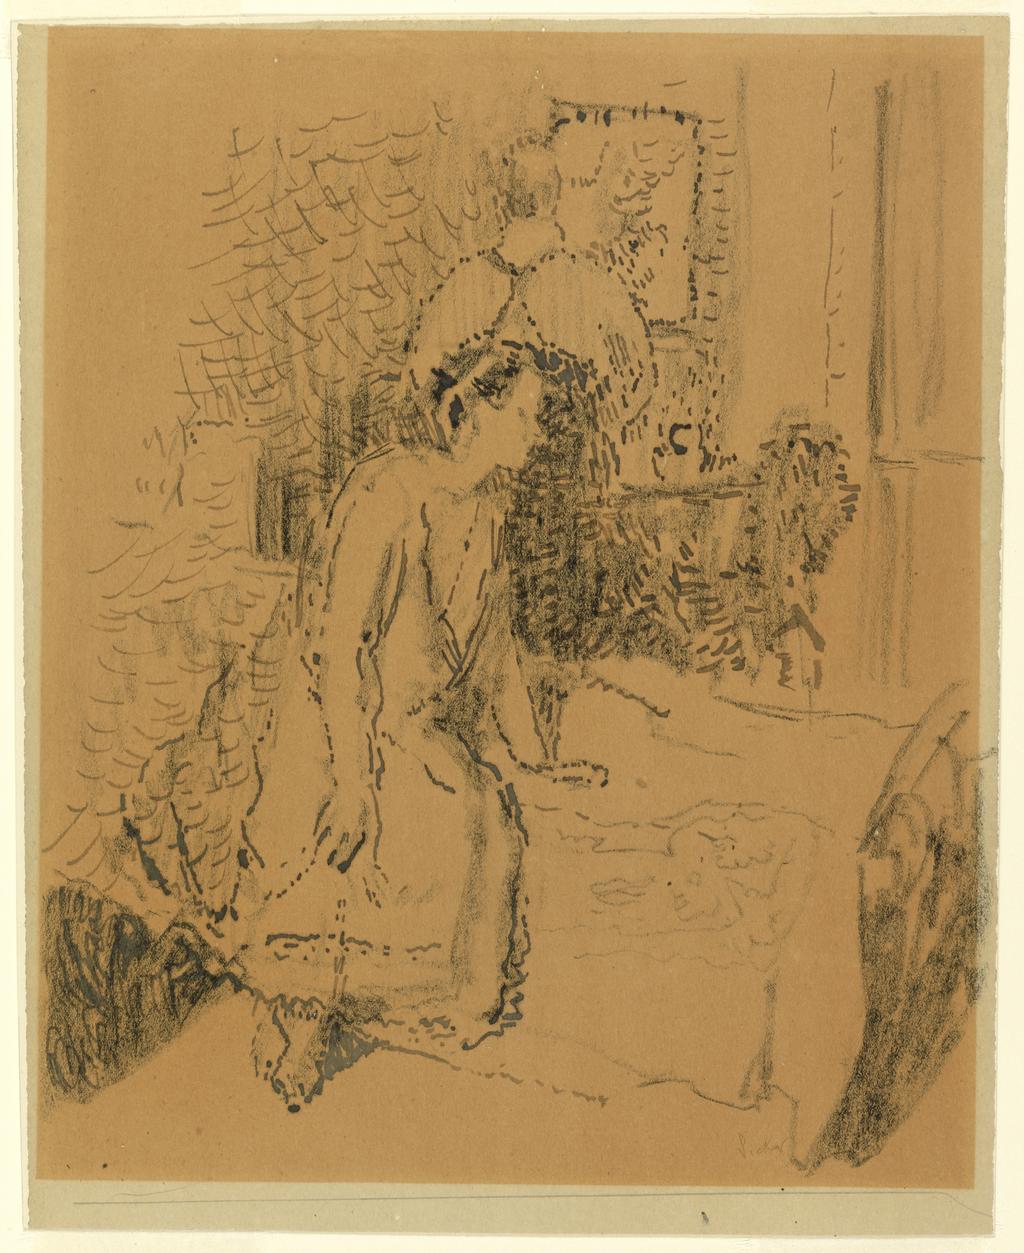 An image of Hubby and Marie. Sickert, Walter Richard (British, 1860-1942). Pen and ink and charcoal on brown-toned paper, circa 1928. Notes: Elaine Thérèse Lessore (1884-1945), painter and embroideress, married Sickert as his third wife in 1926. Sir Ivor and Lady Batchelor Bequest.